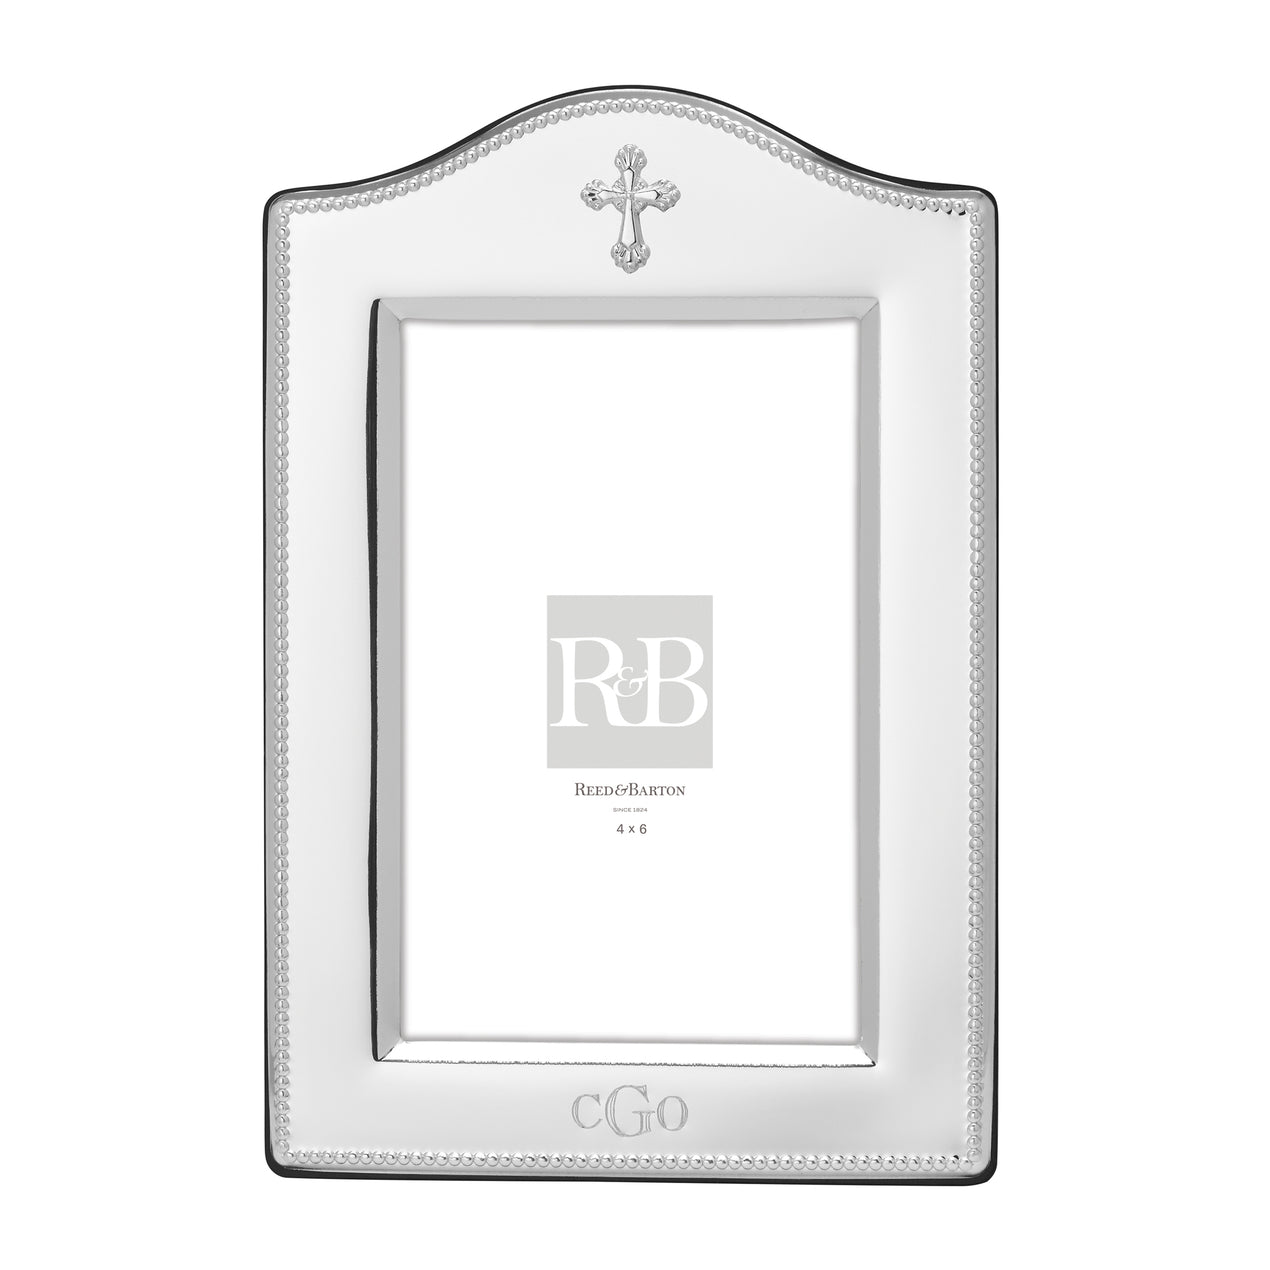 Personalized Silverplated Abbey Cross 4x6 Frame – Reed and Barton